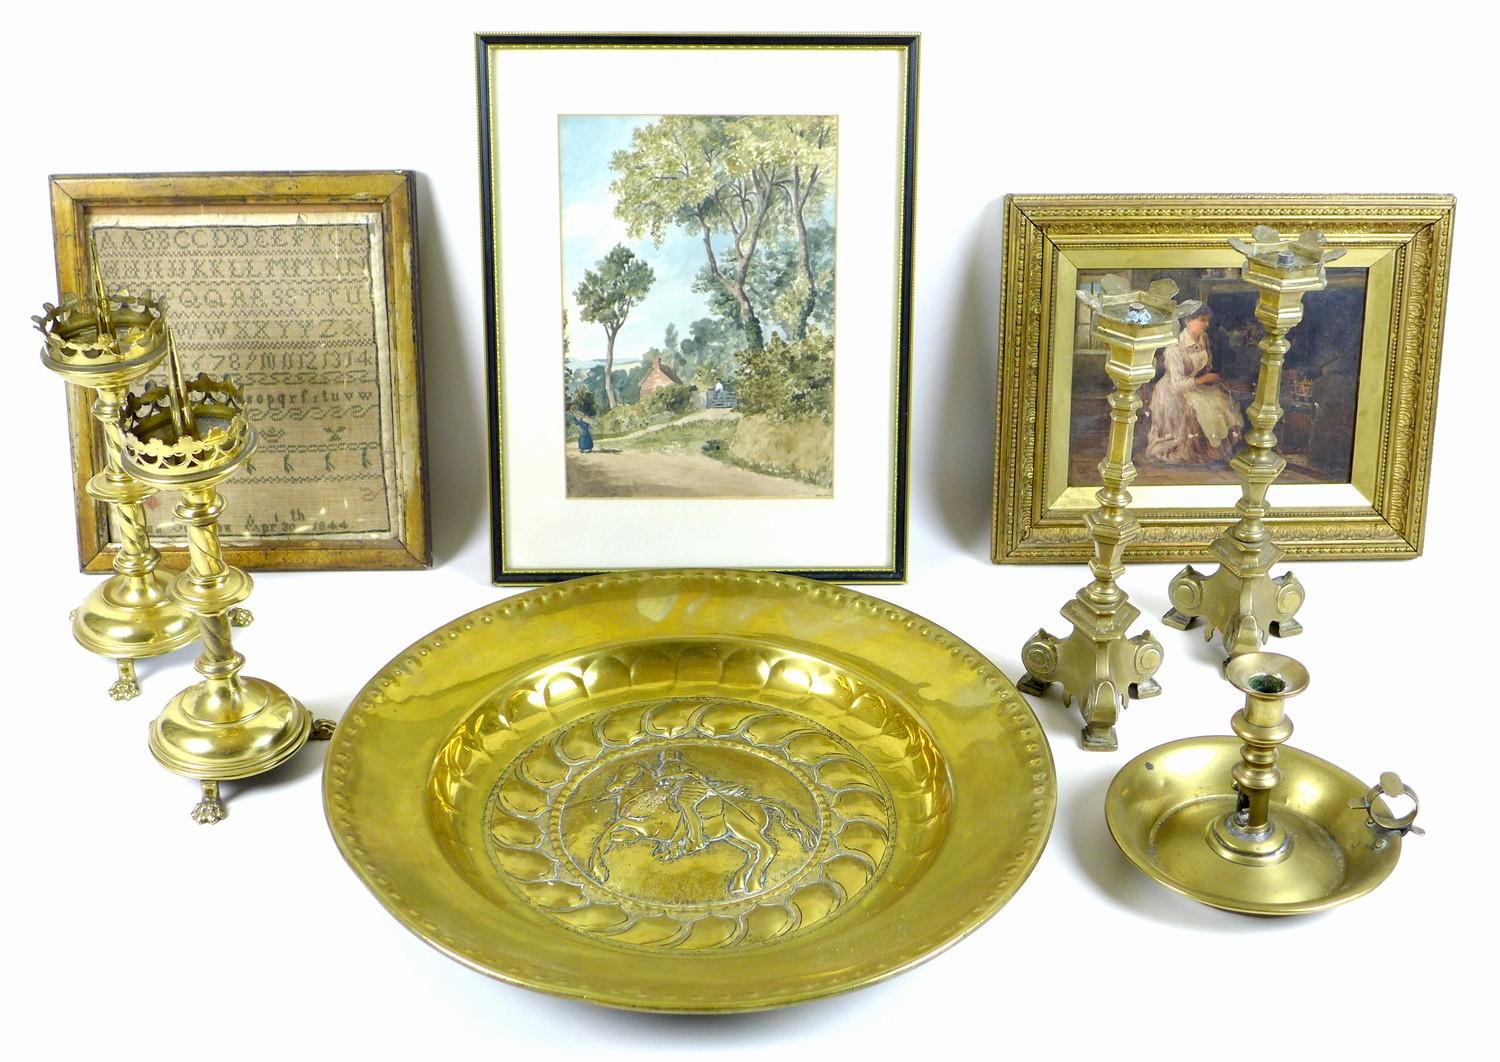 A collection of brass items, including an early 19th century brass chamber stick with candle